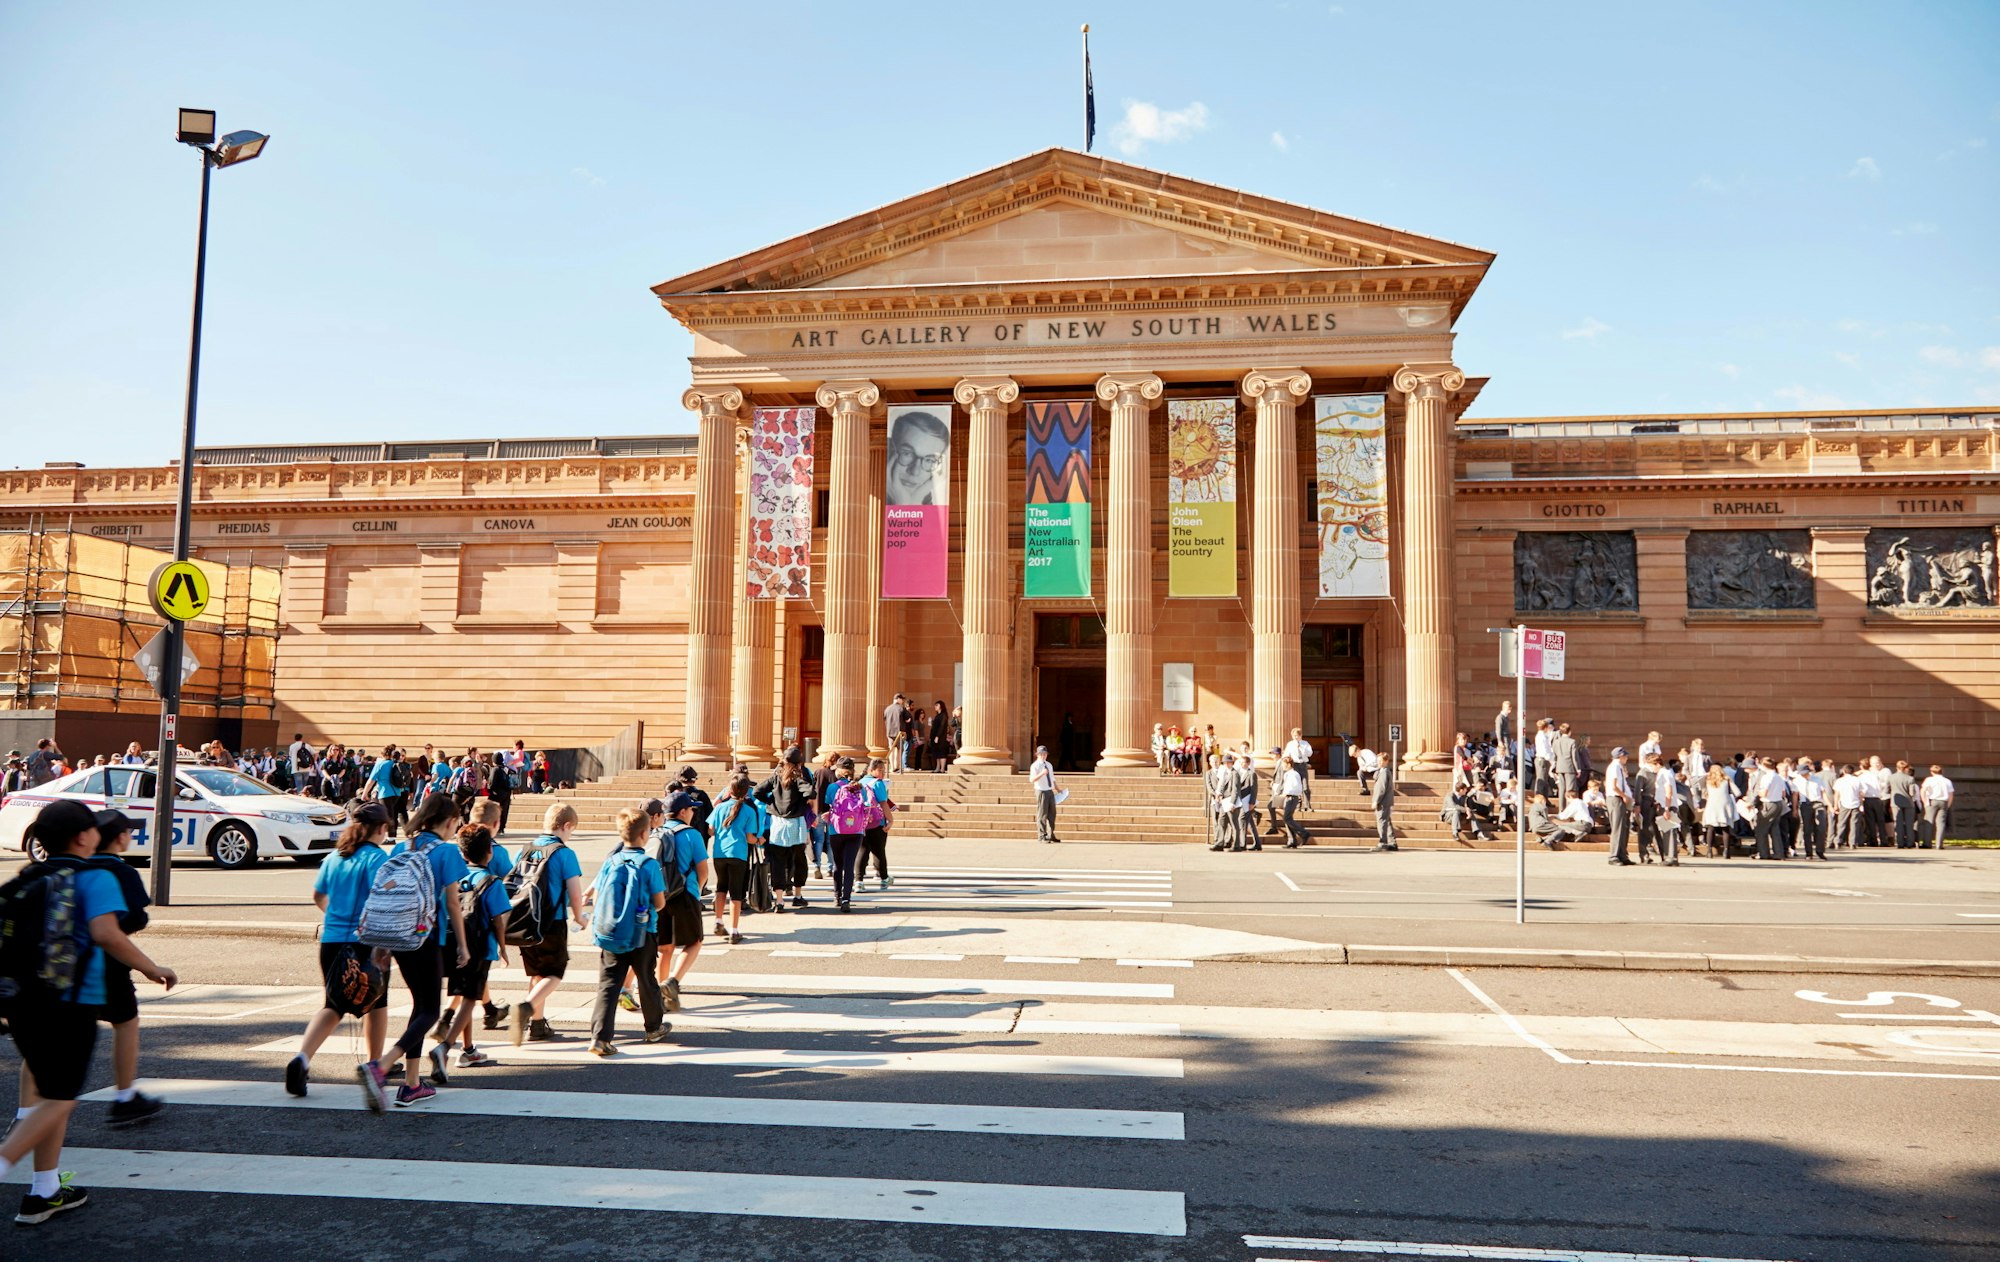 Students arriving at the Art Gallery of New South Wales